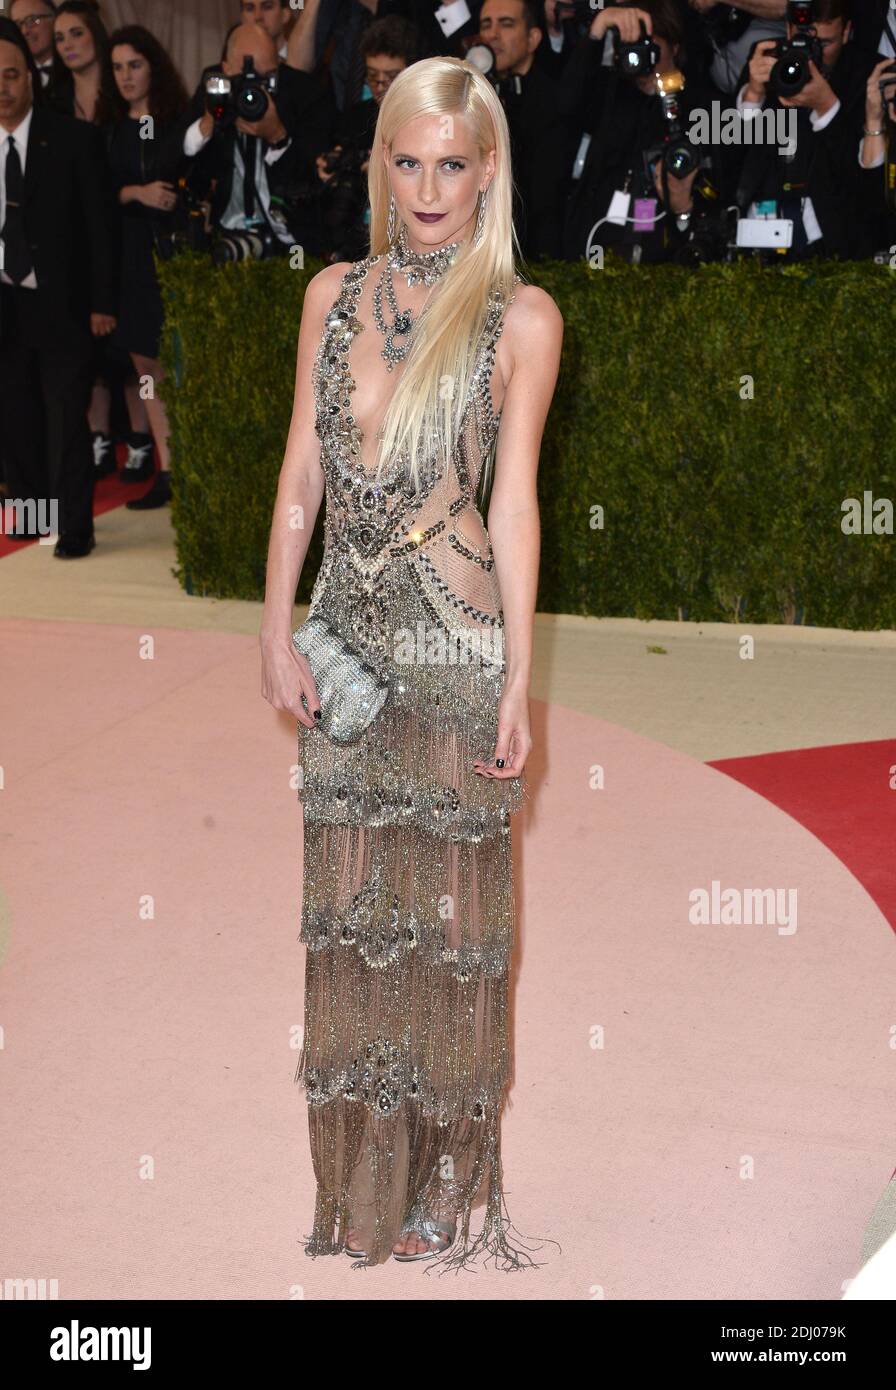 Poppy Delevingne attends the Manus x Machina: Fashion in an Age of Technology Costume Institute Benefit Gala at Metropolitan Museum of Art on May 2, 2016 in New York City, NY, USA. She wears a dress of Marchesa. Photo by Lionel Hahn/ABACAPRESS.COM Stock Photo